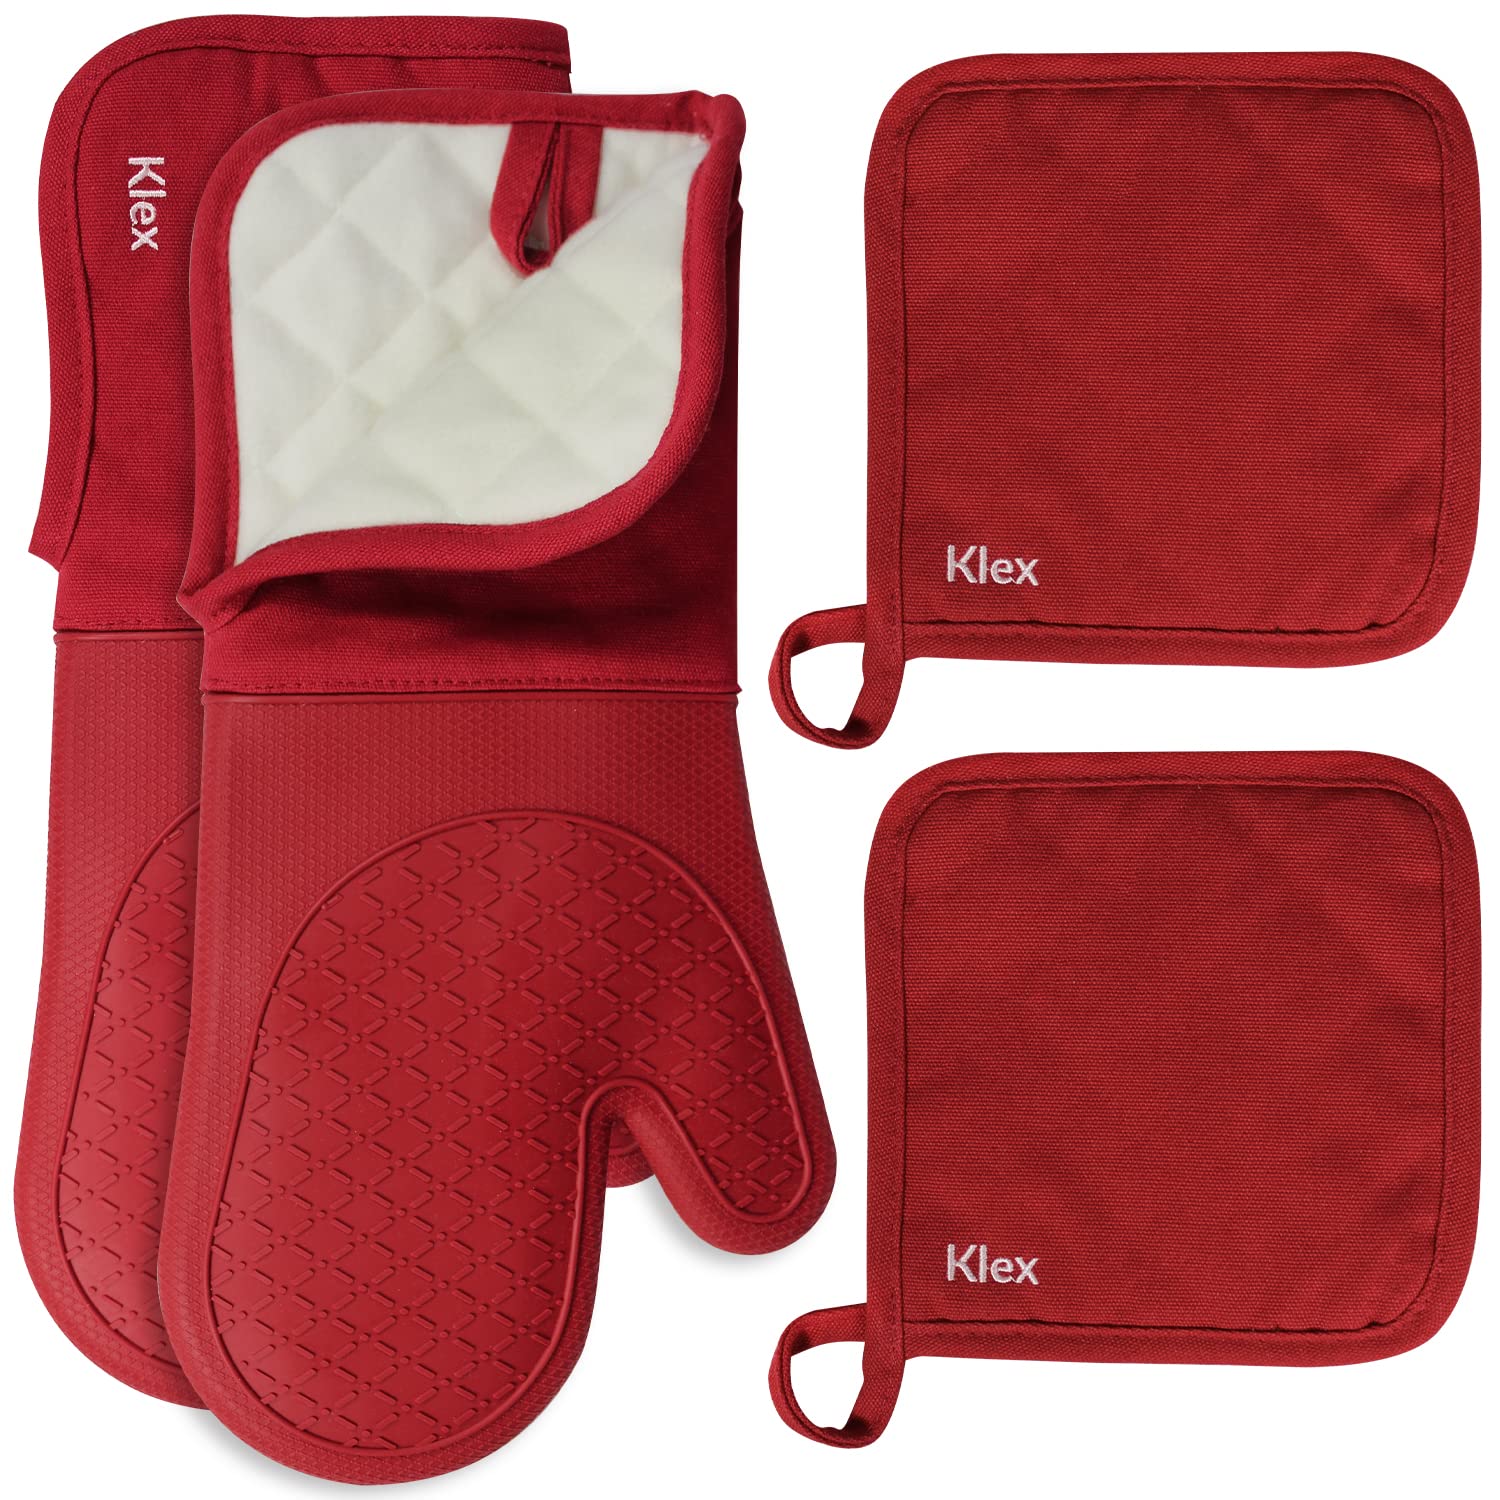 Klex Extra Long Silicone Oven Mitts and Pot Holders